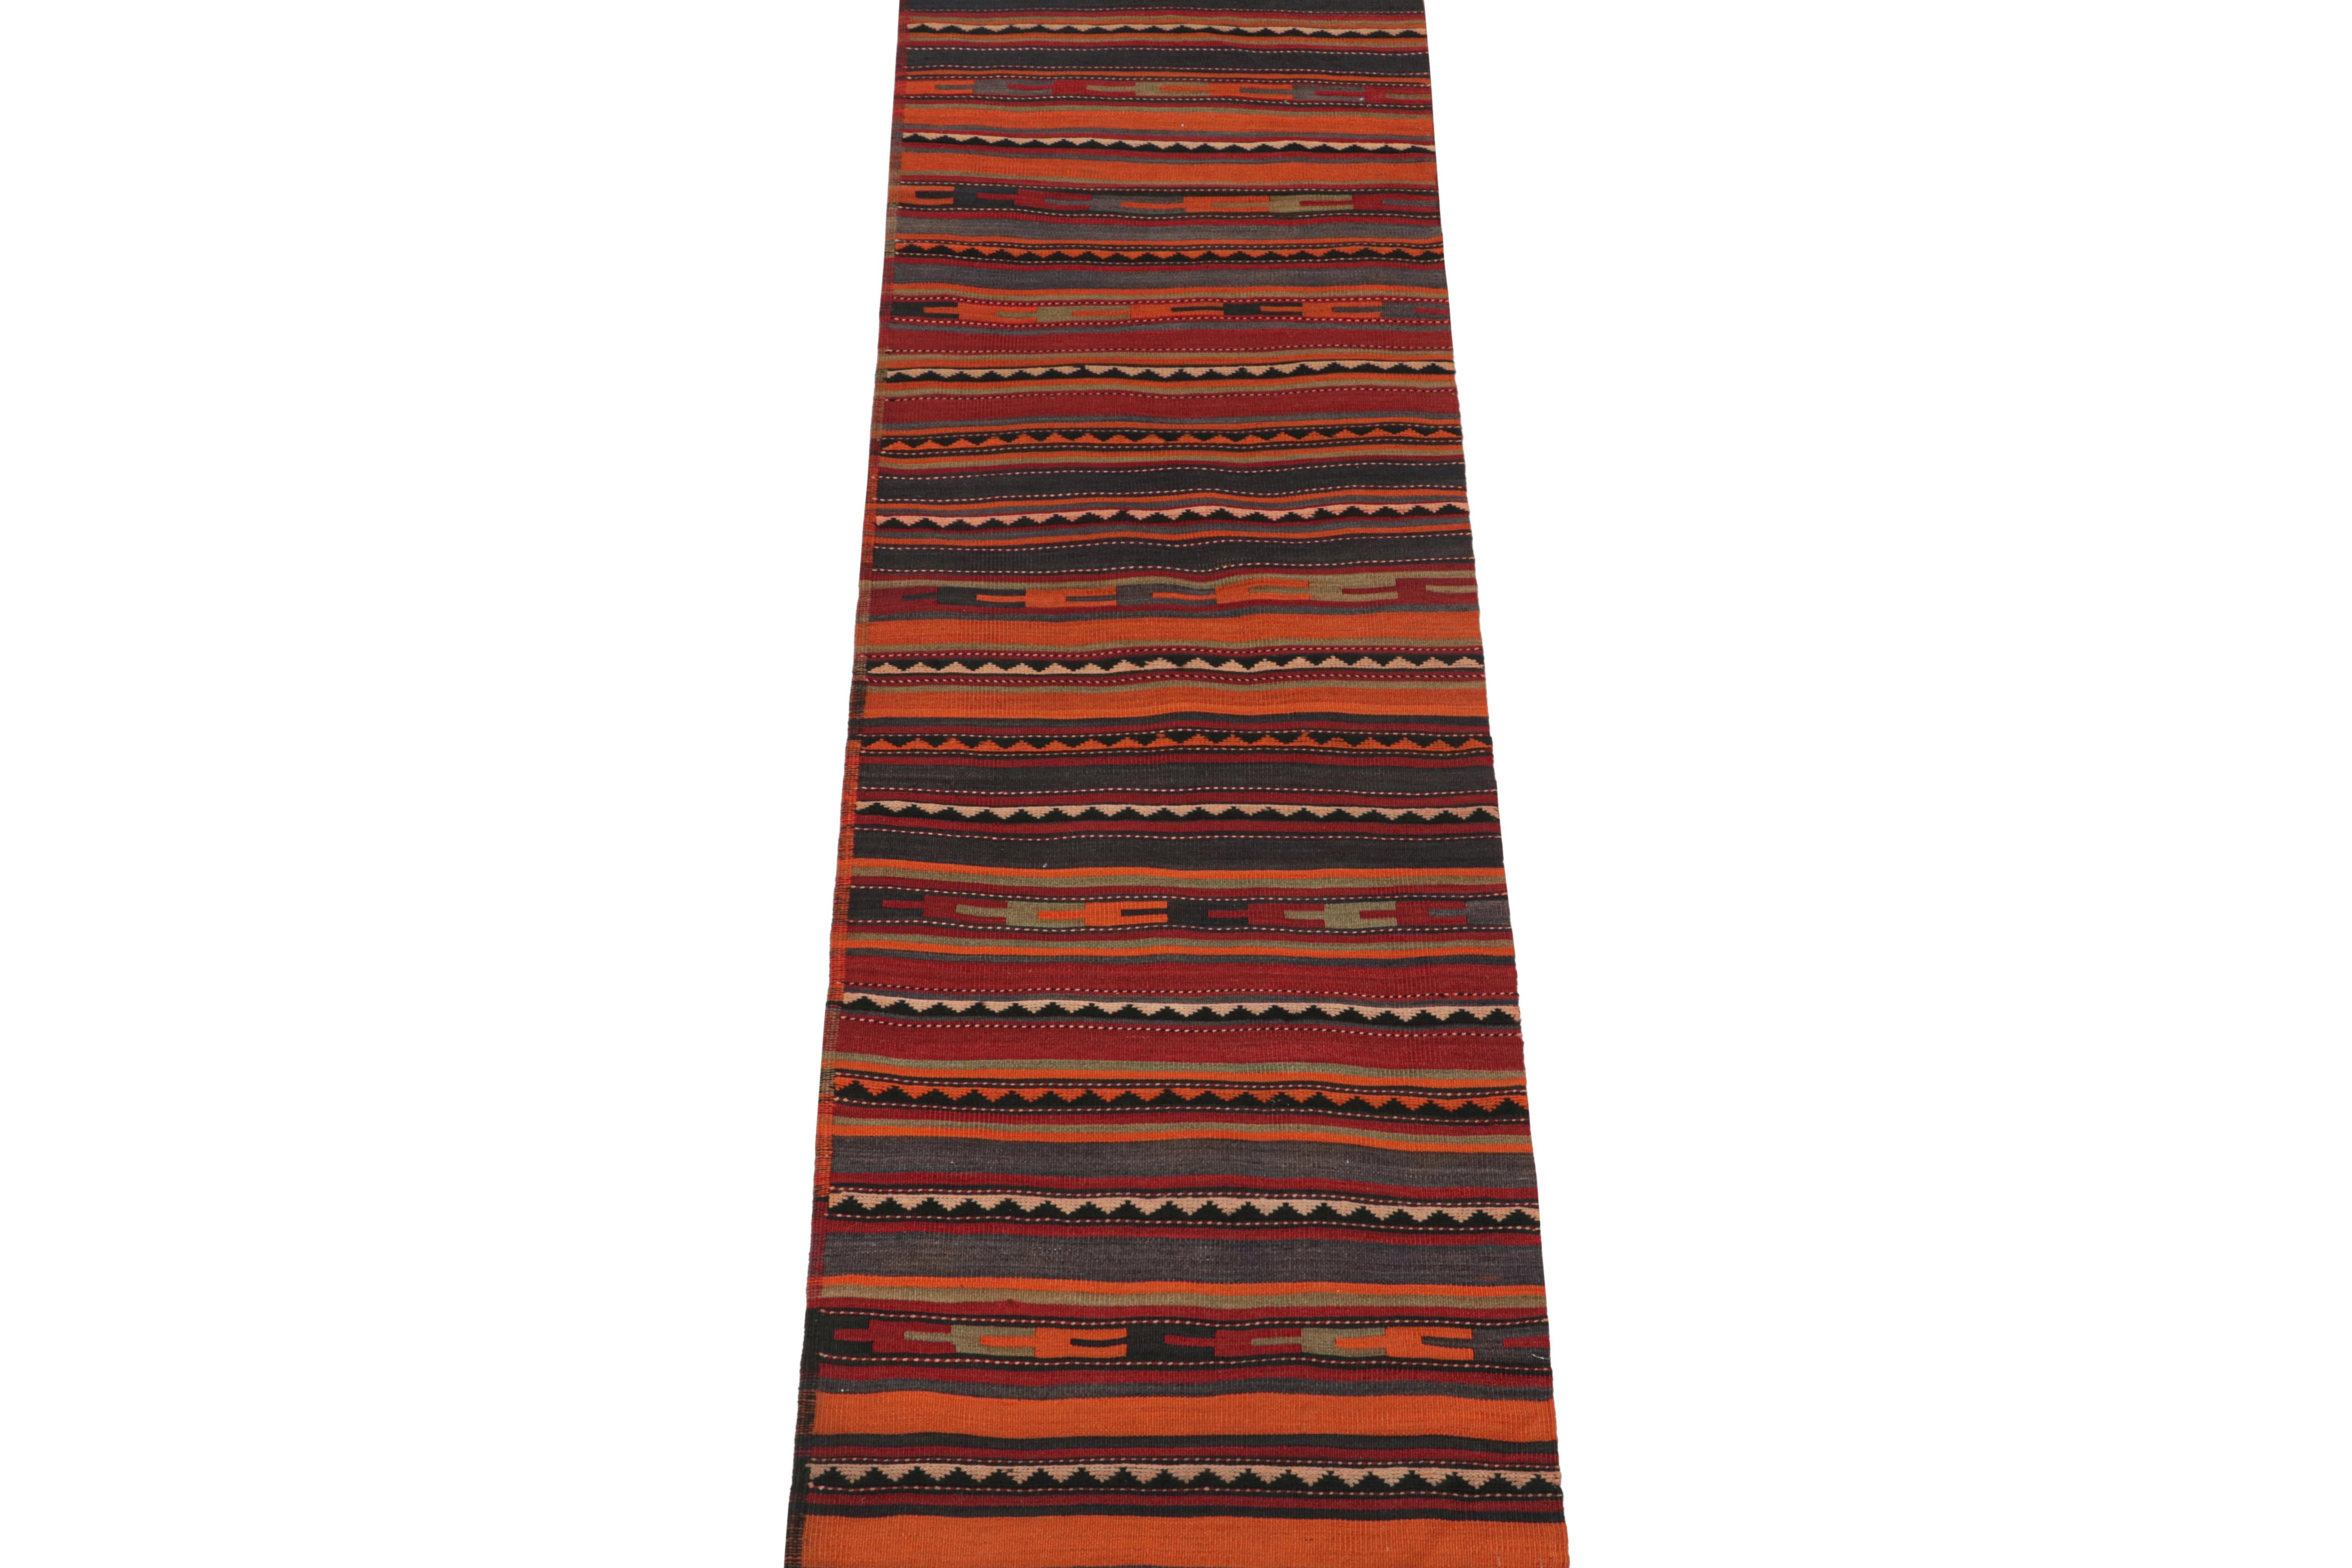 This vintage 3x10 Persian kilim is believed to be a Bidjar runner of mid-century design—handwoven in wool circa 1950-1960.

The design favors a stripes and geometric patterns over a deeply saturated orange colorway. Keen eyes will further admire